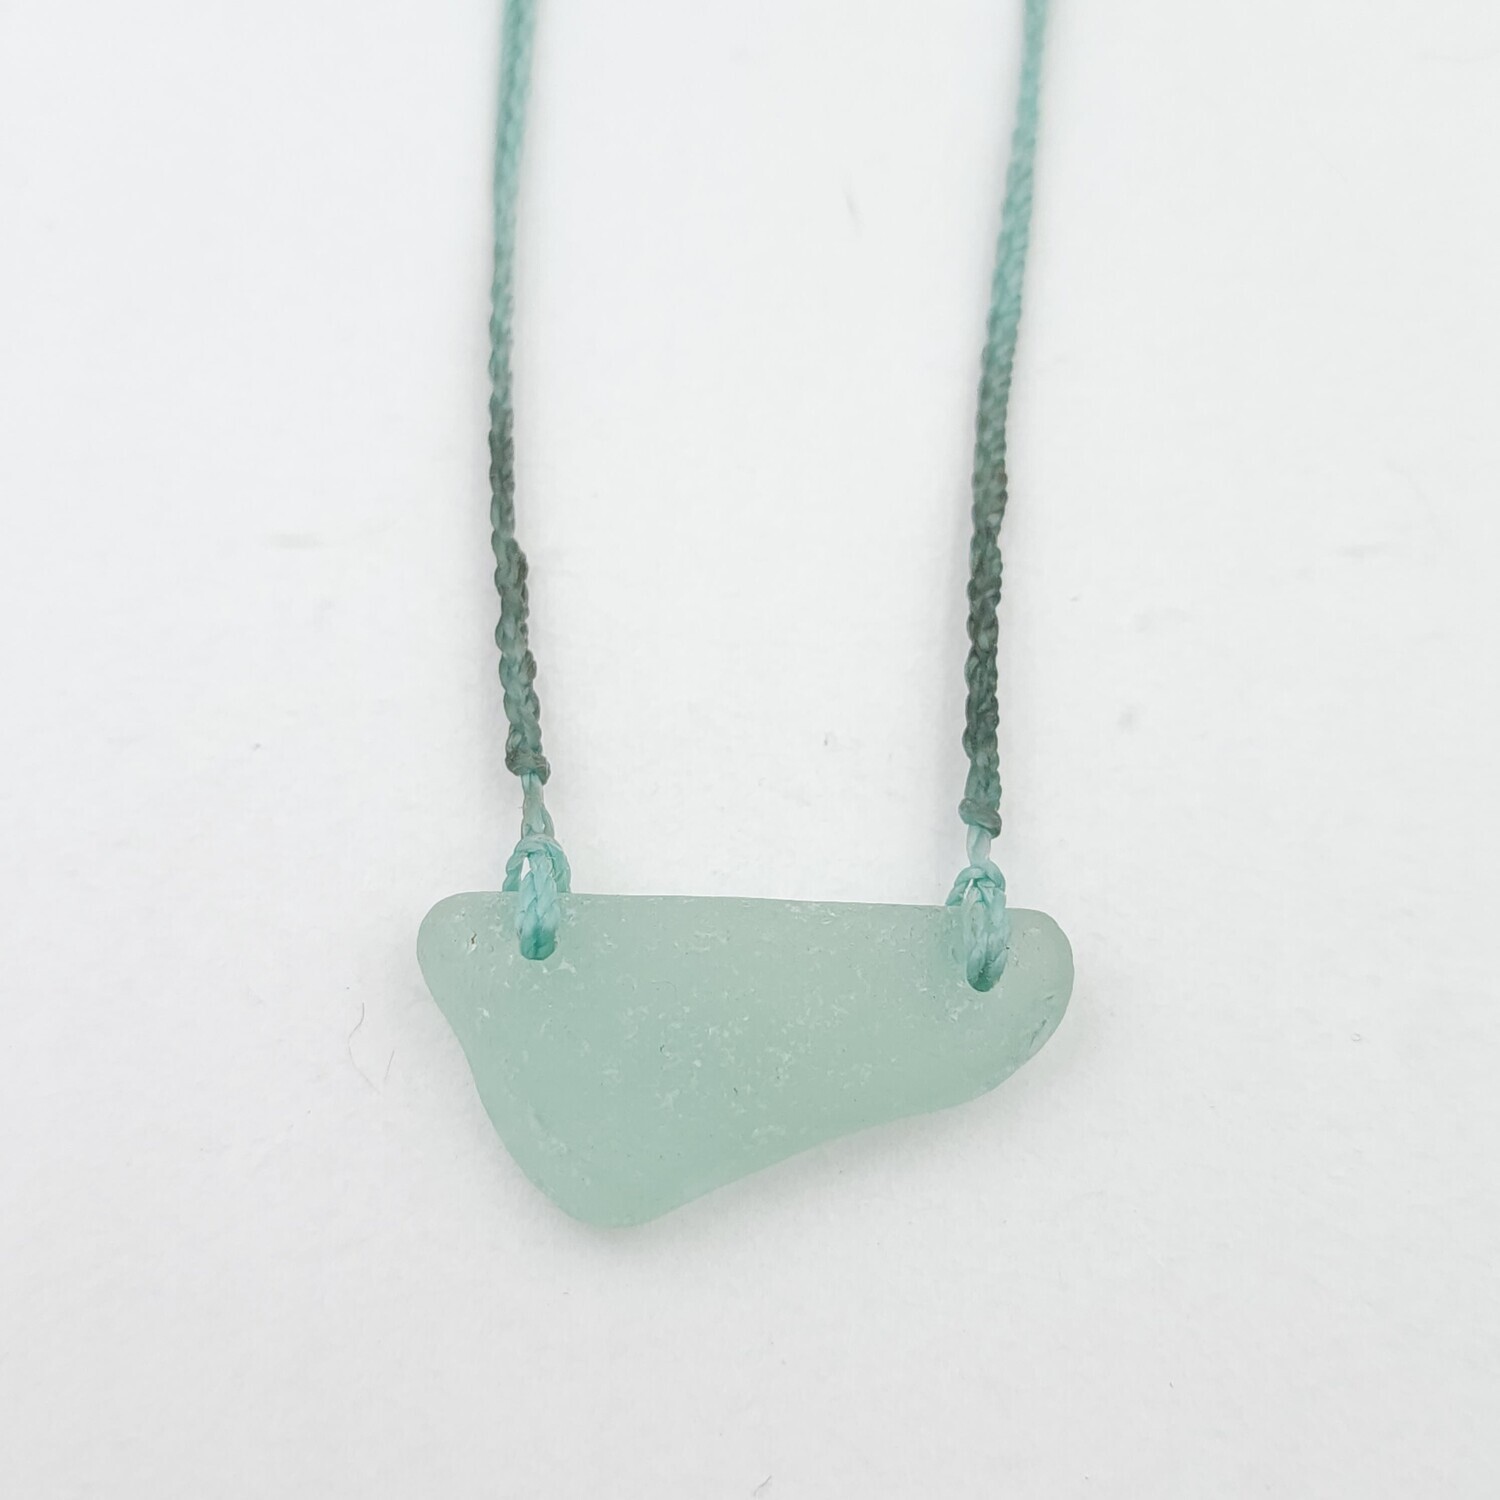 Seafoam Green Lake Erie Beach Glass Necklace on Waxed Cord